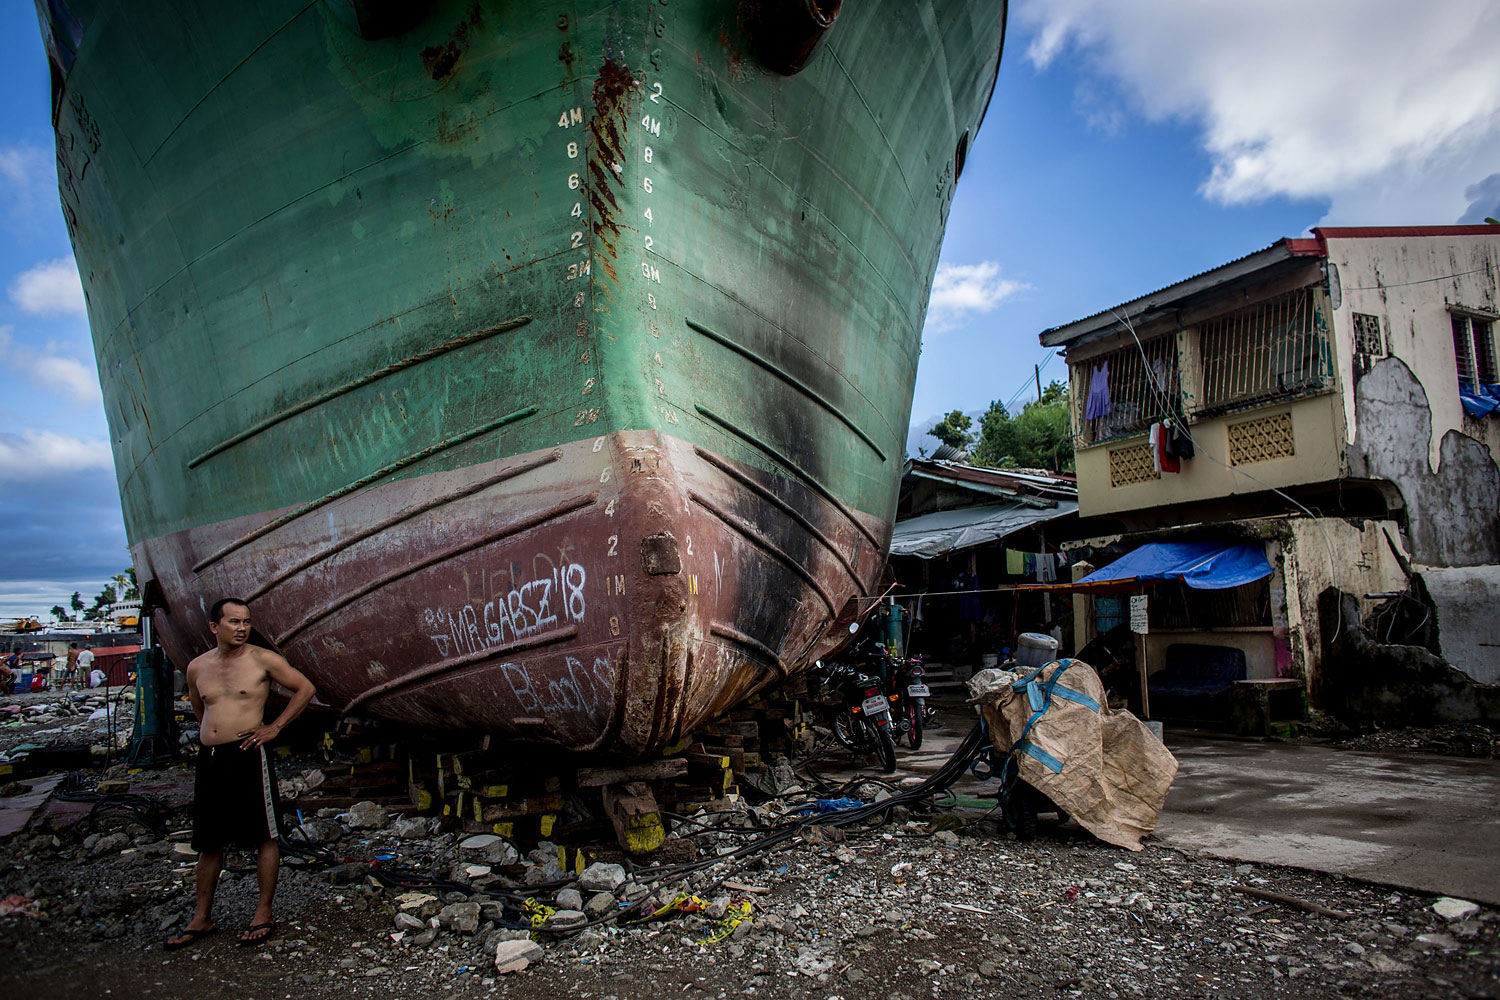 A man stands in front of a large ship grounded by Typhoon Haiyan on April 18, 2014 in Tacloban, Leyte, Philippines,